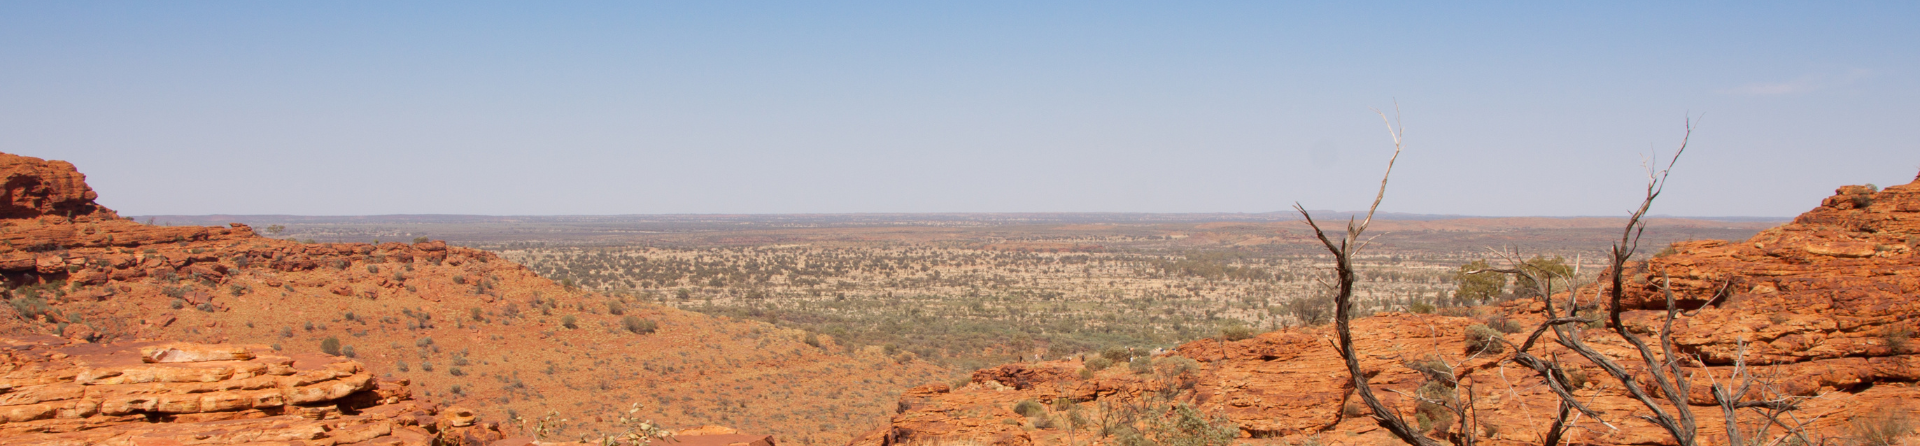 3 things to do in Watarrka National Park